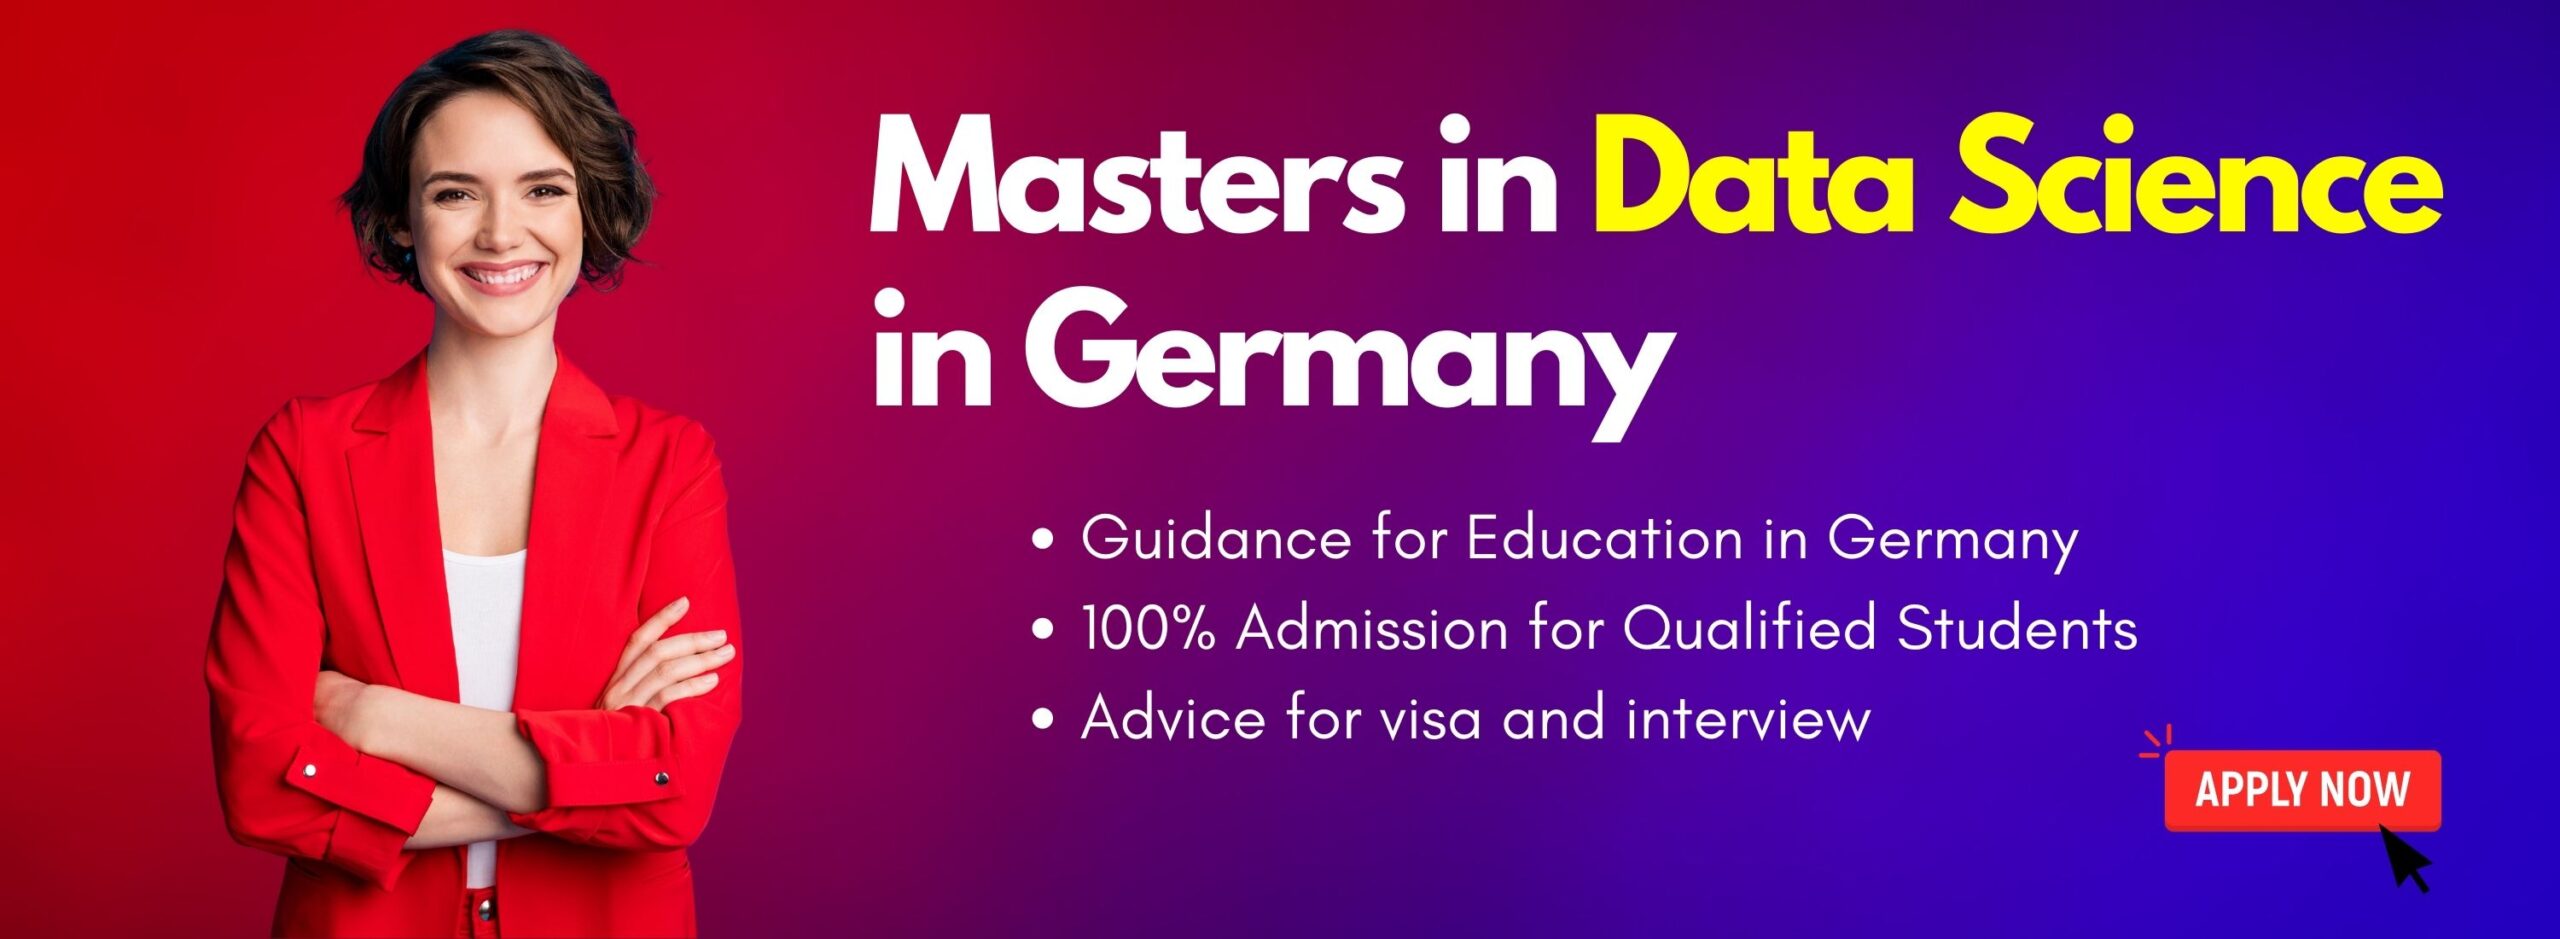 Study Masters in Data Science in Germany